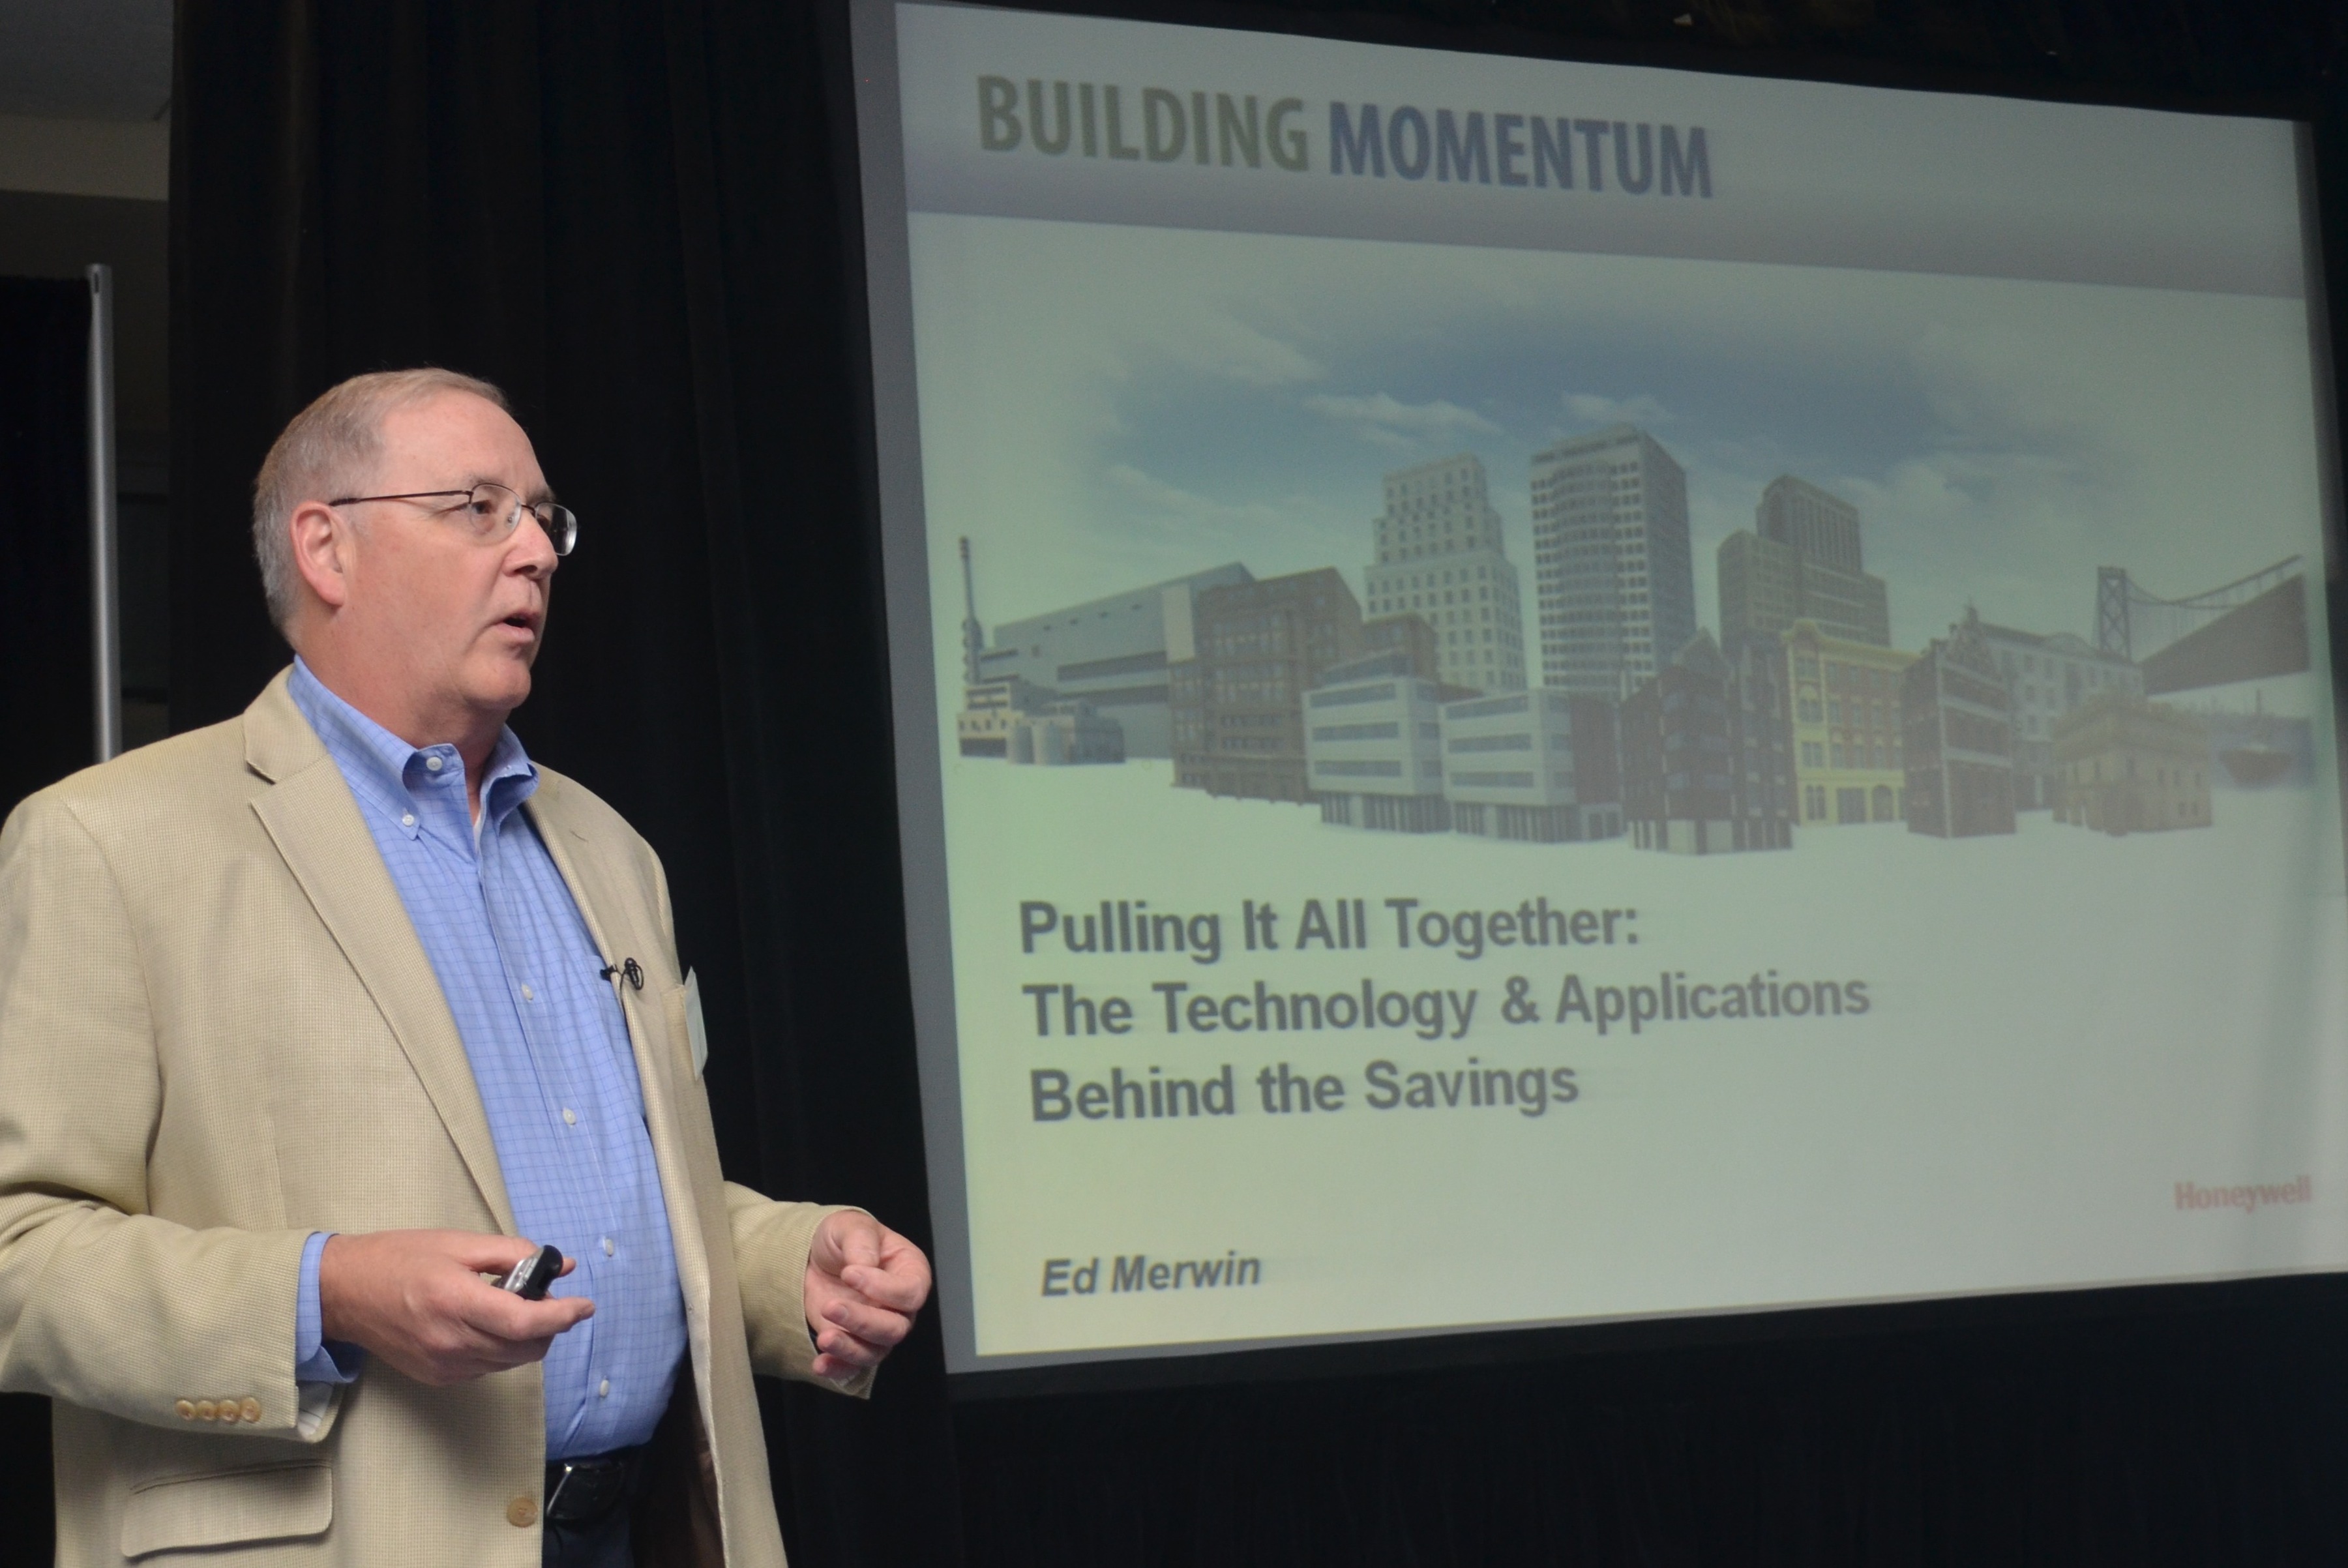 Ed Merwin, Niagara sales leader for Honeywell ECC Niagara Framework-based brands, gives his presentation, Putting It All Together: The Technology & Applications Behind the Savings.